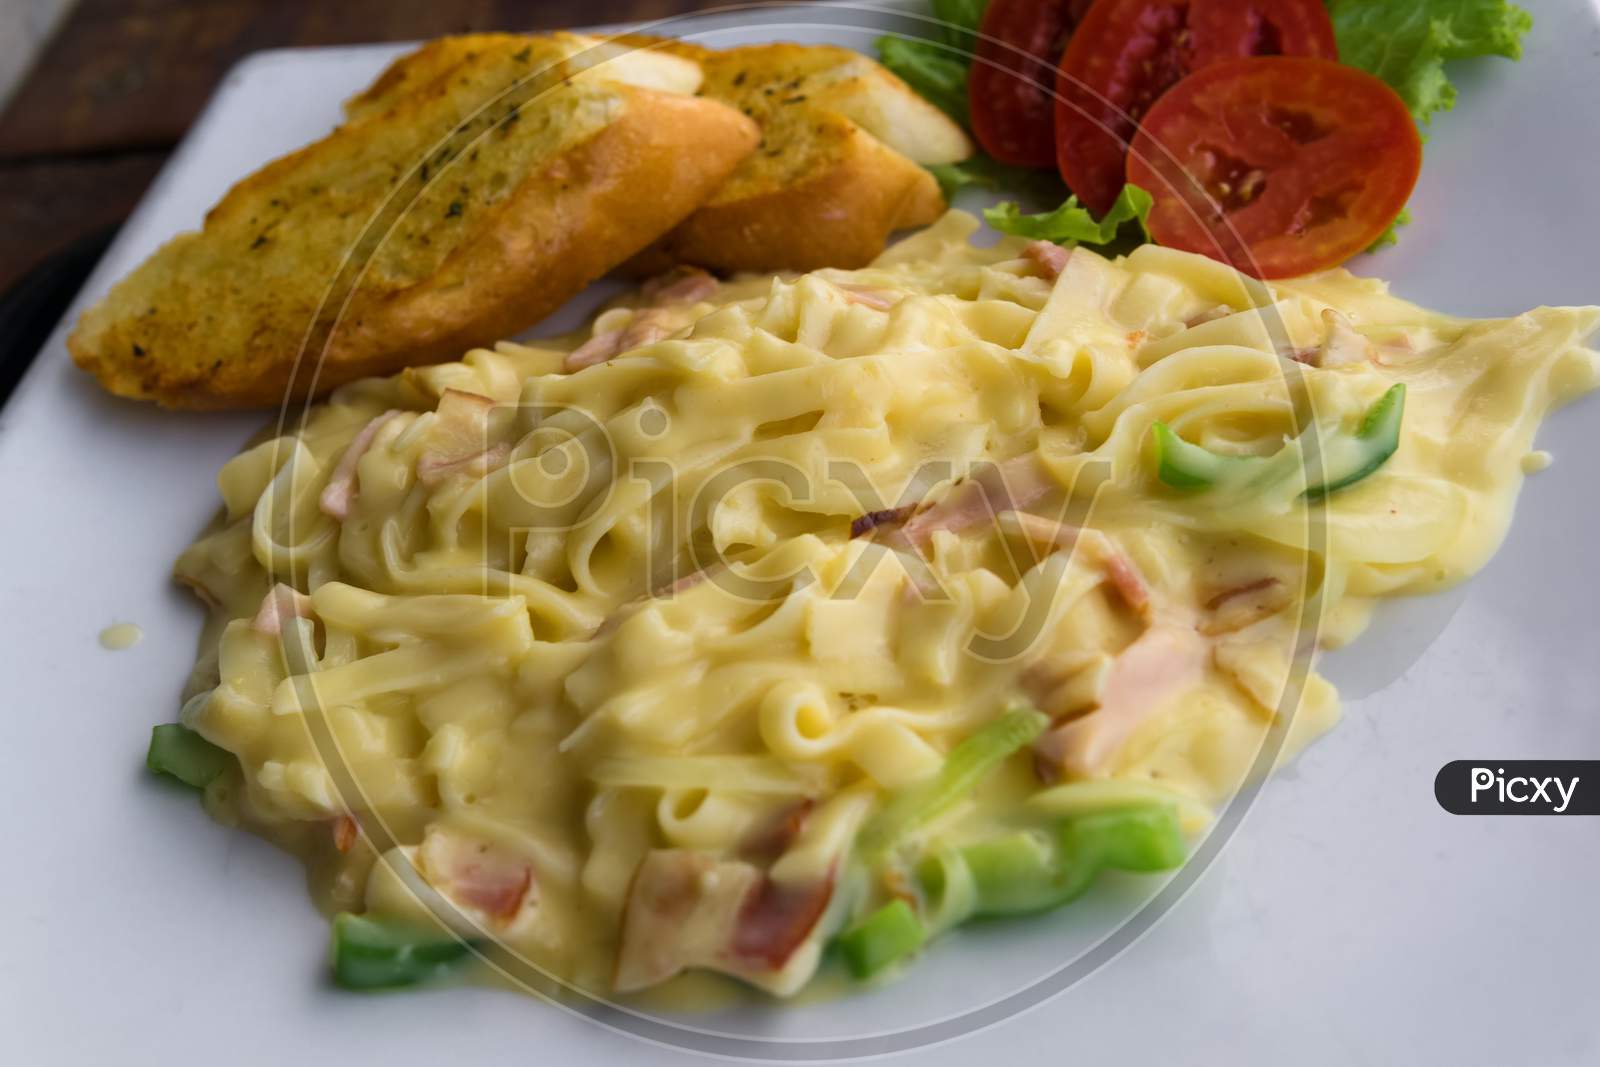 Delicious Pasta With Sauce,Ham And Tomatoes